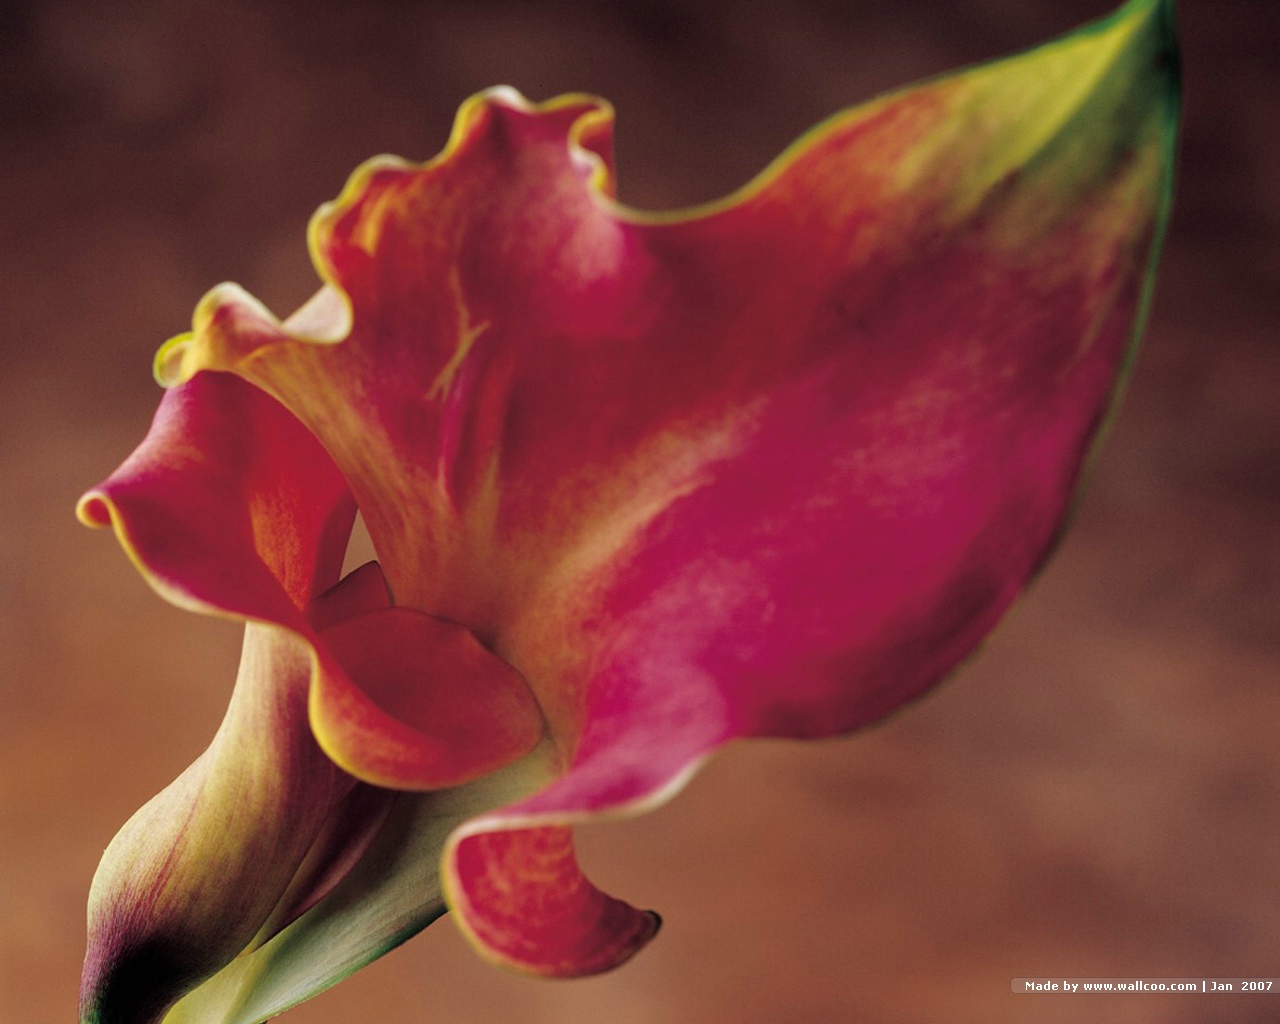 Red Calla Lily Is A Great Wallpaper For Your Puter Desktop And